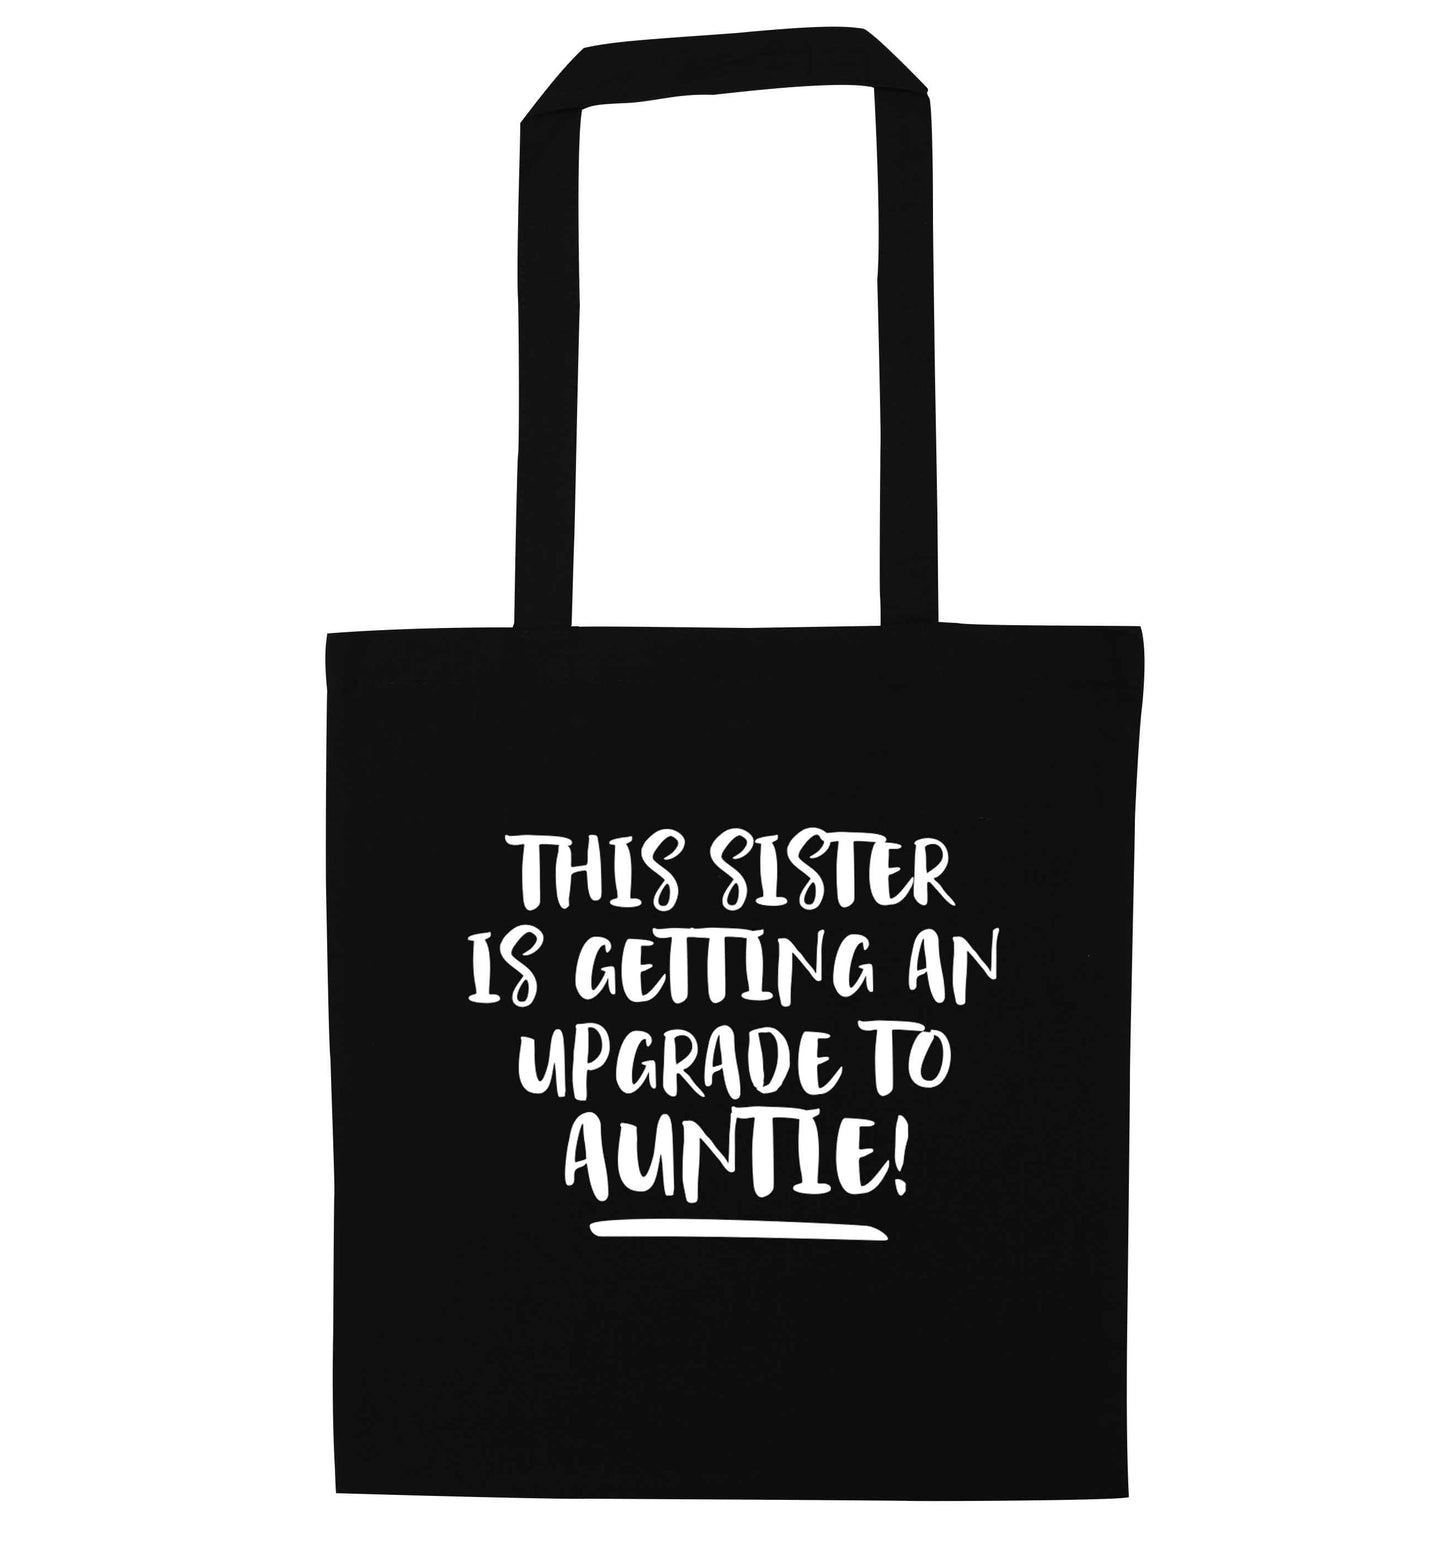 This sister is getting an upgrade to auntie! black tote bag